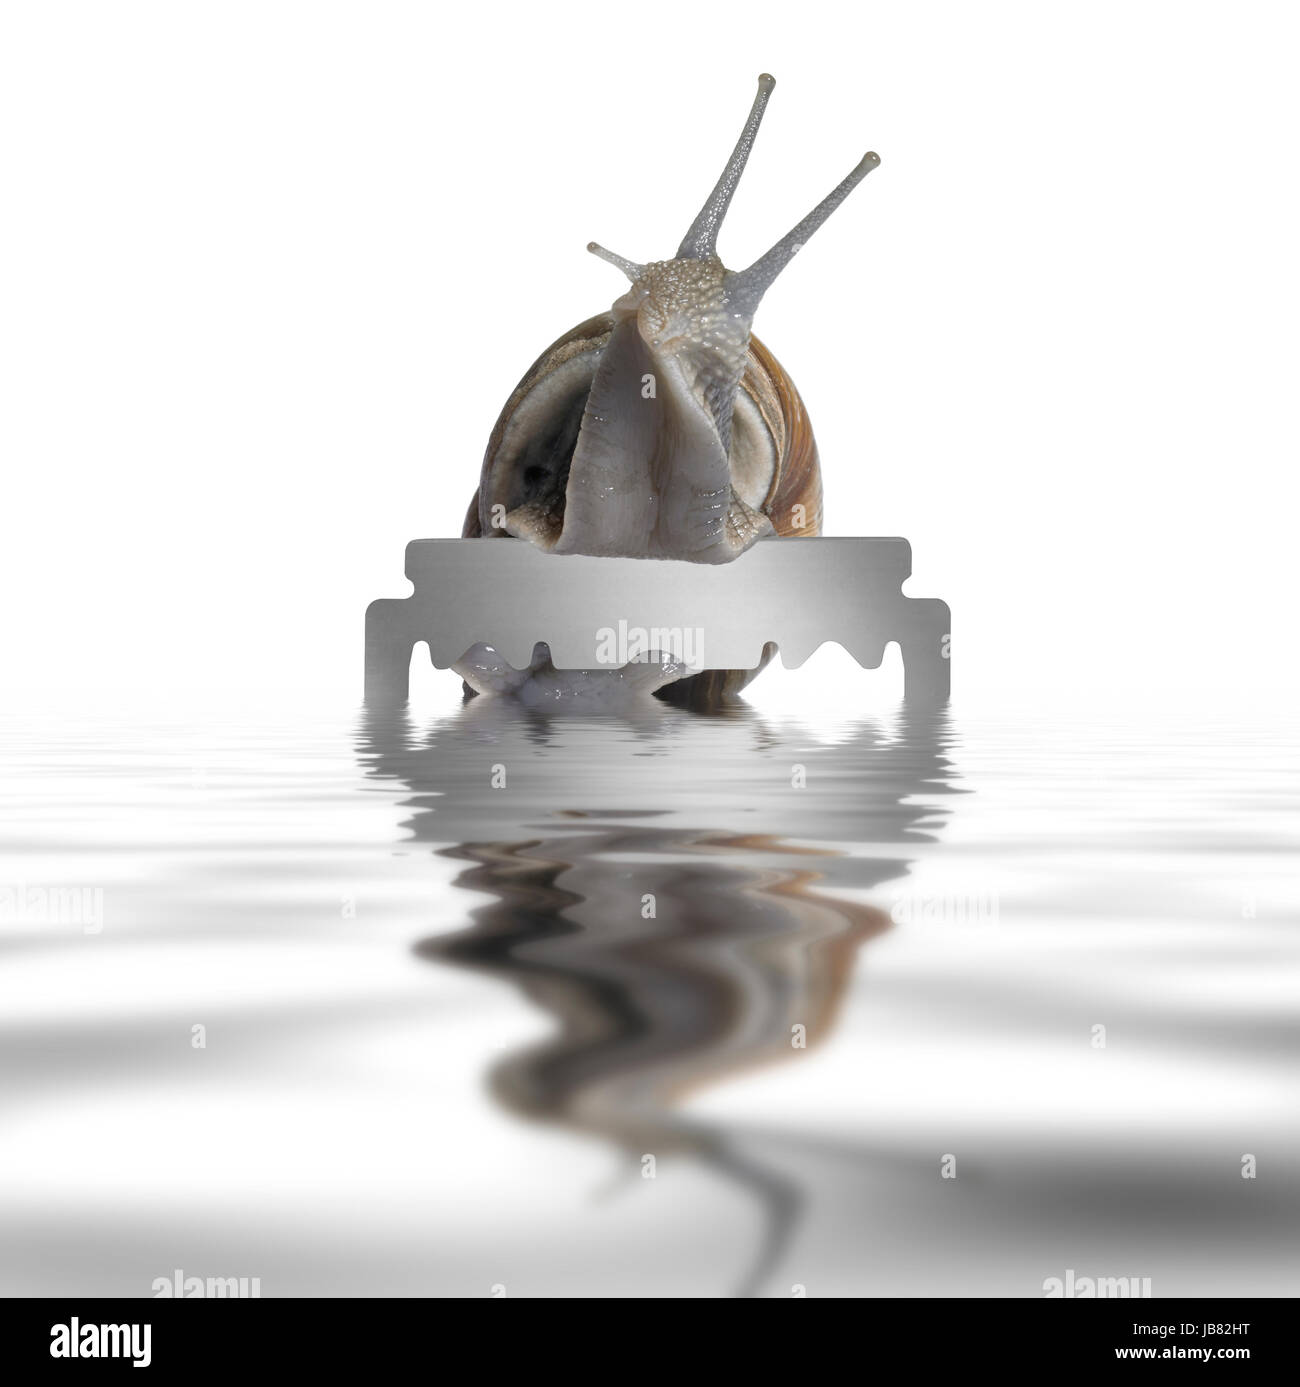 Grapevine snail reachin out on a razor blade on reflective water surface in white back Stock Photo